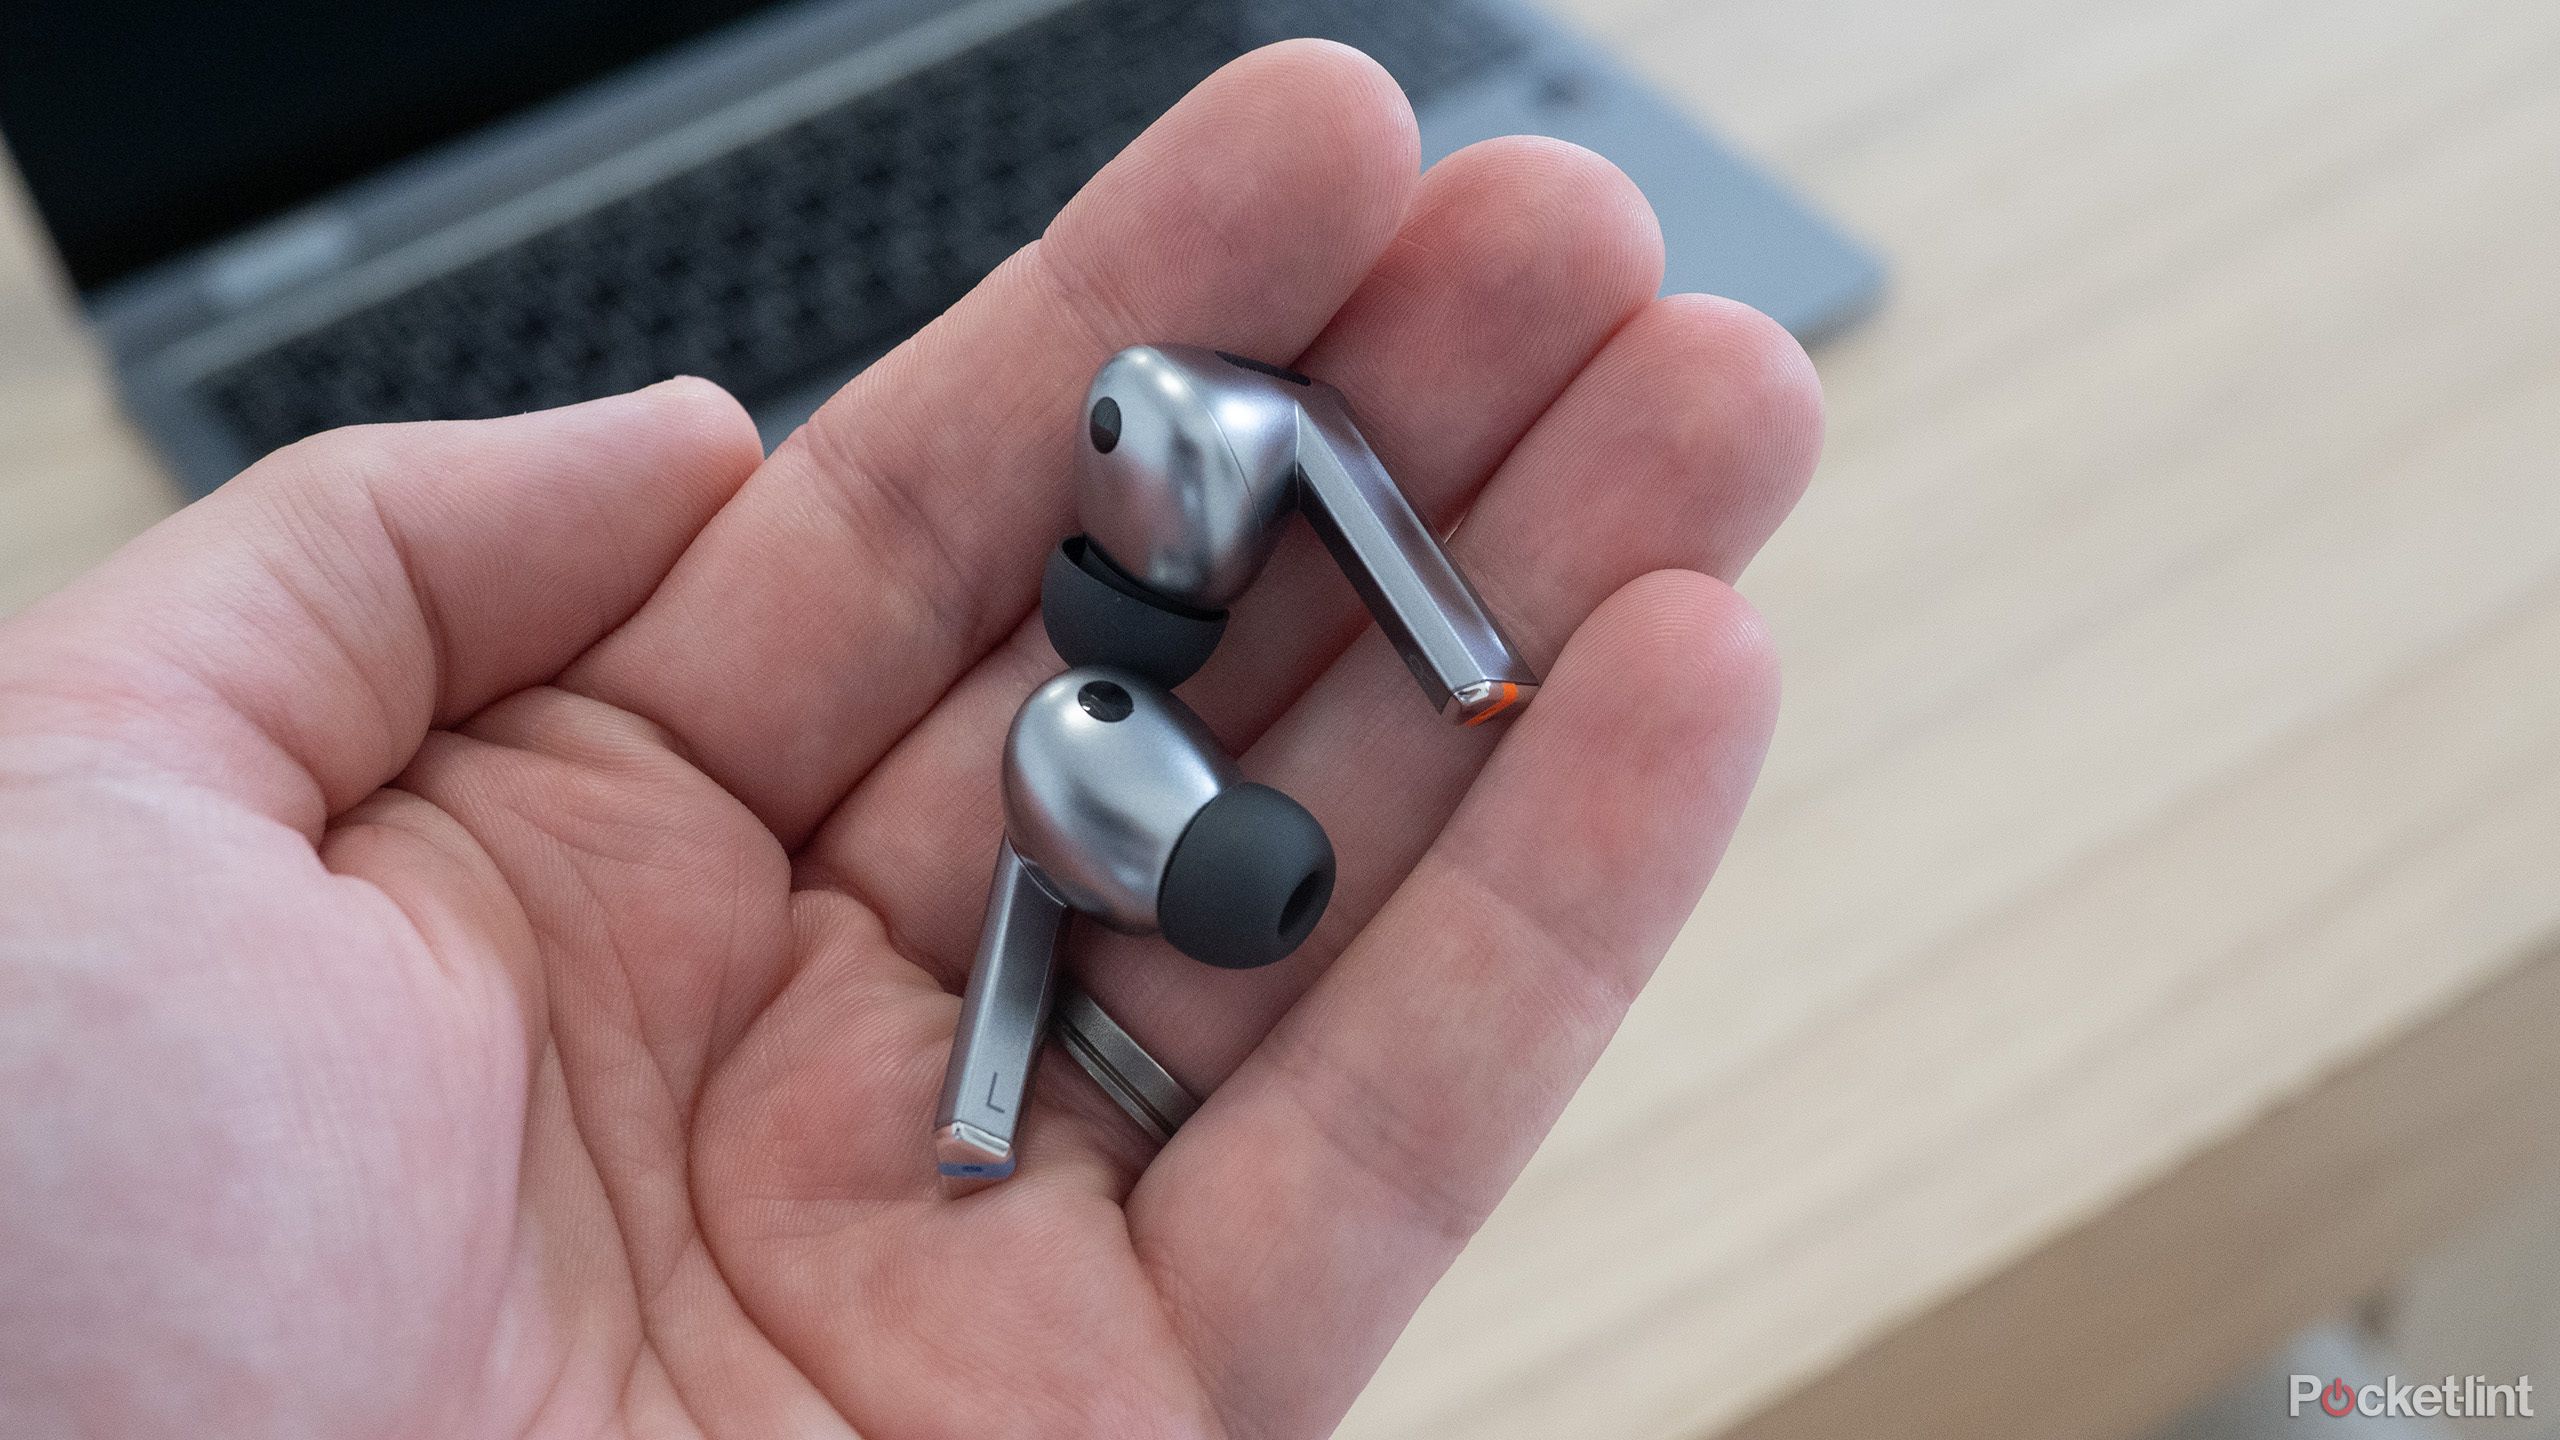 The Samsung Galaxy Buds 3 Pro earbuds being held in a hand.